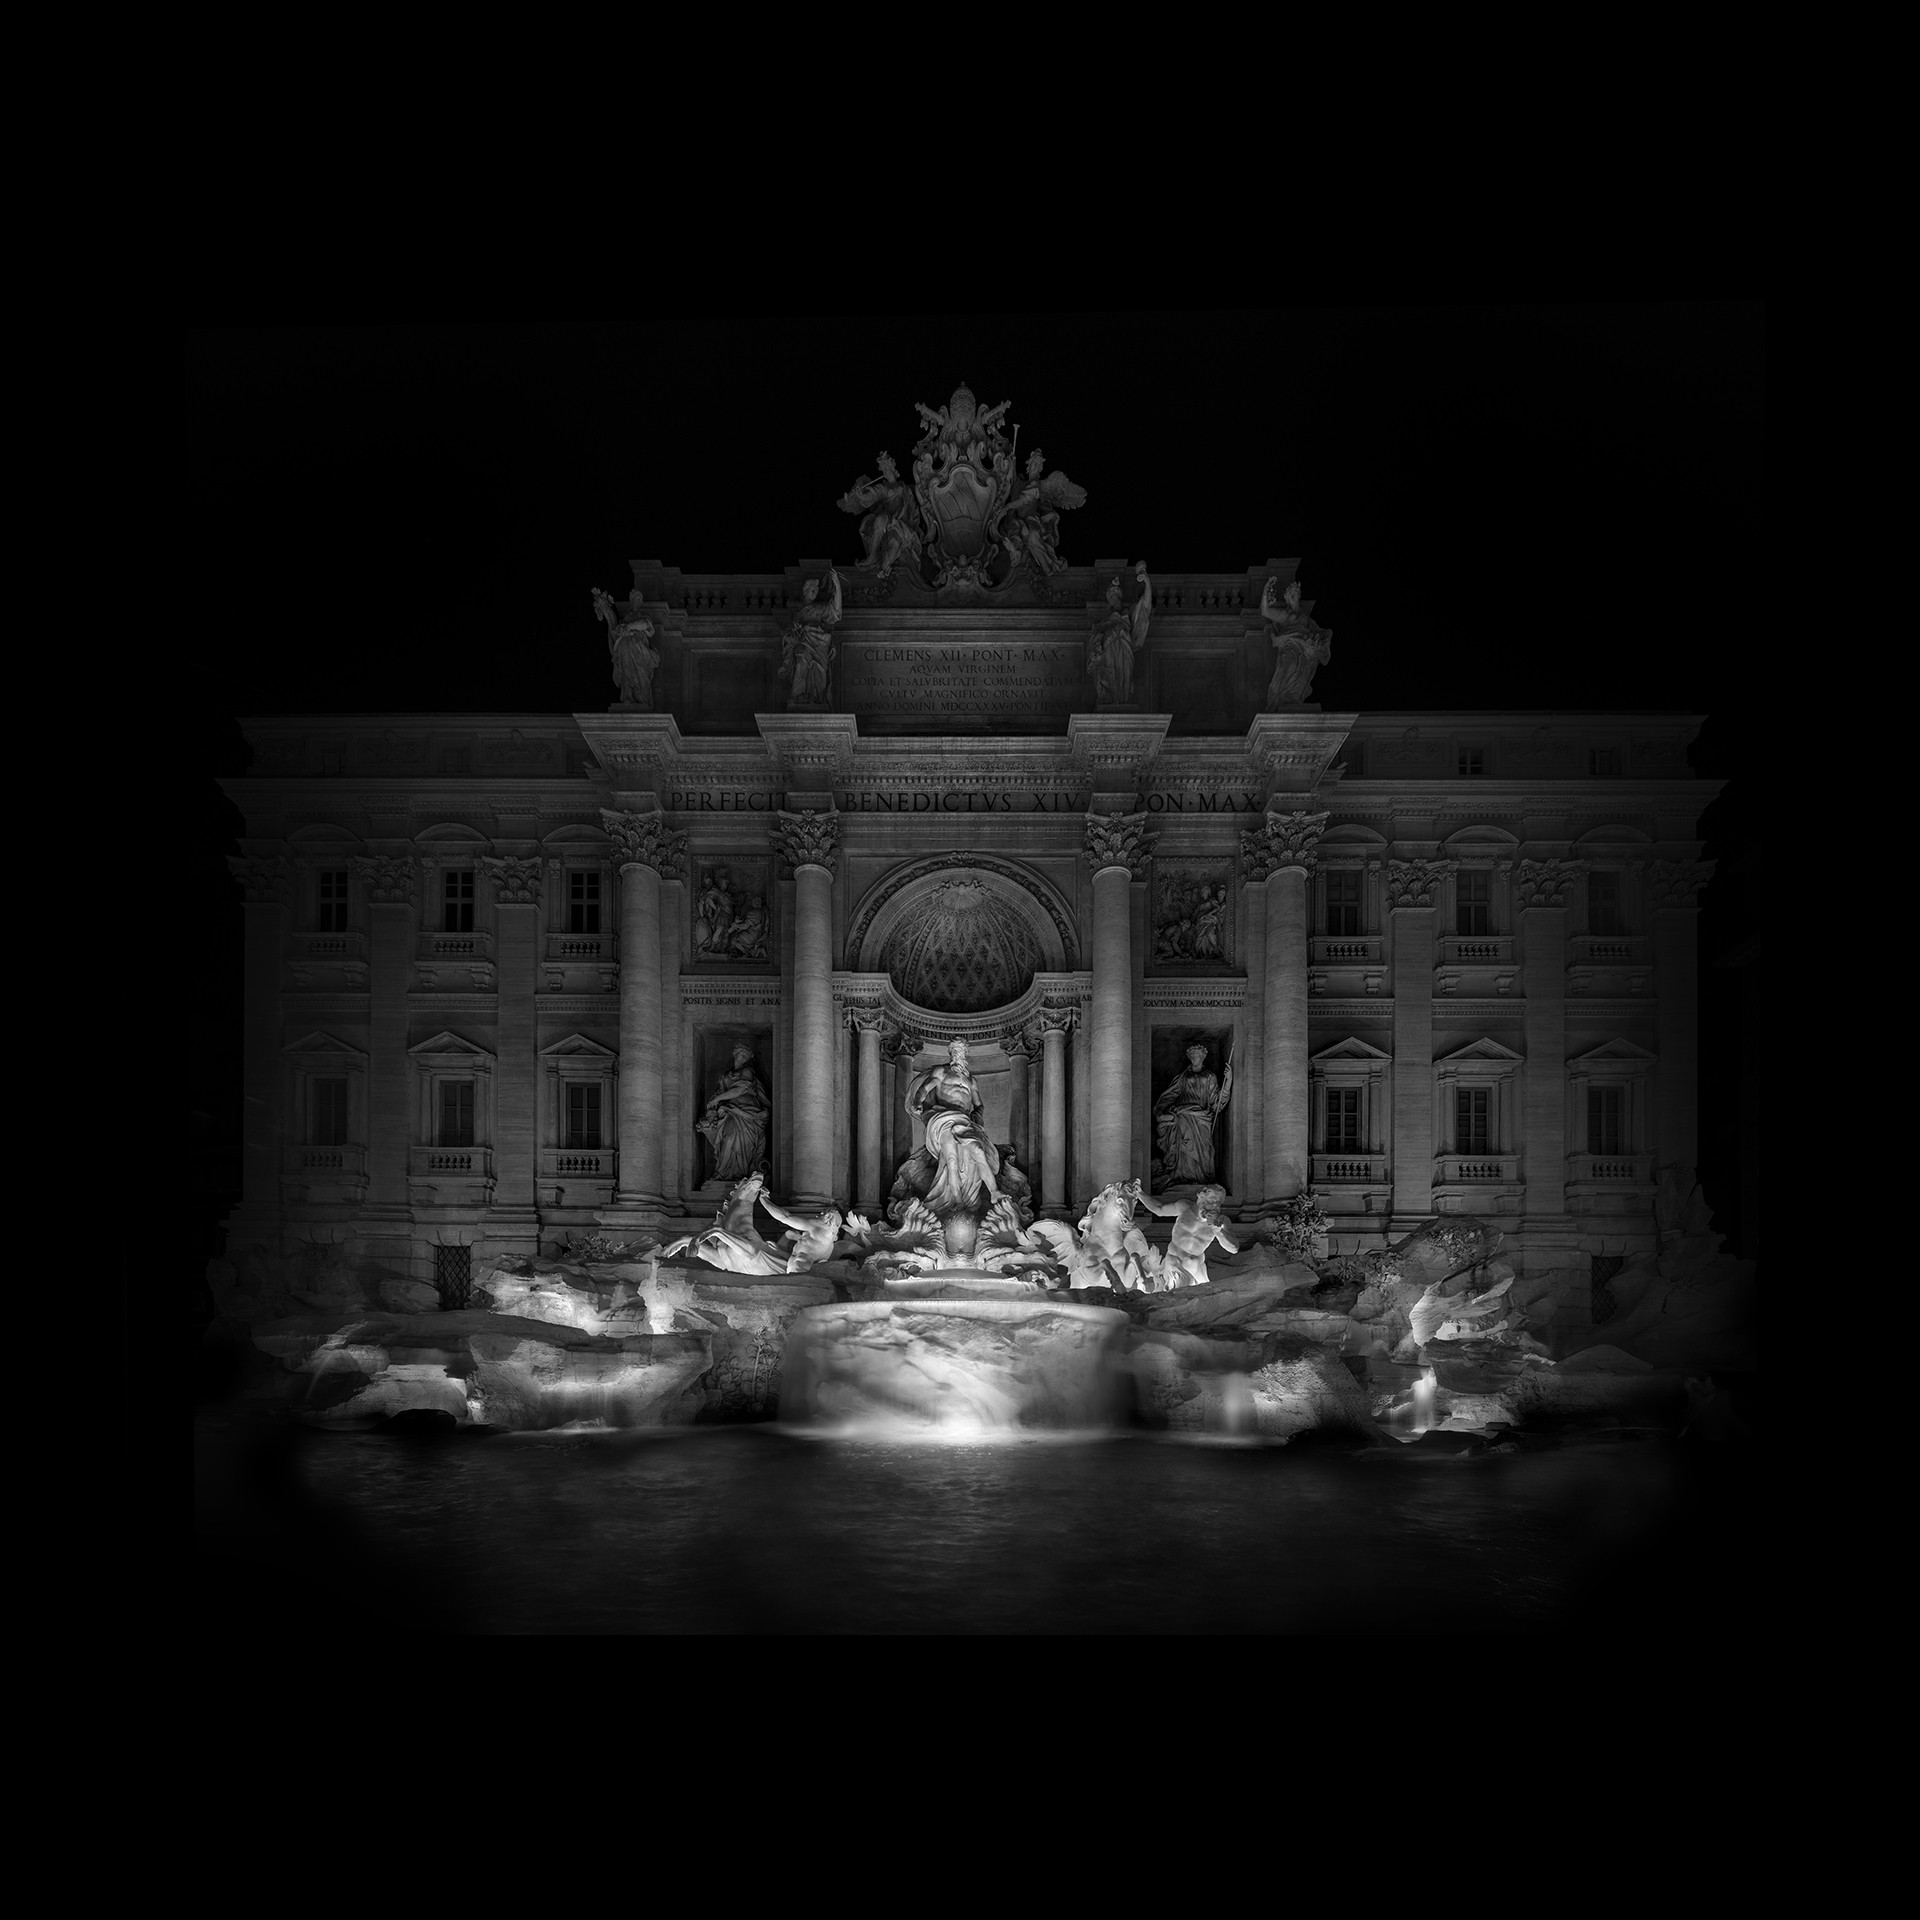 Fontana di Trevi at night photographed in black and white